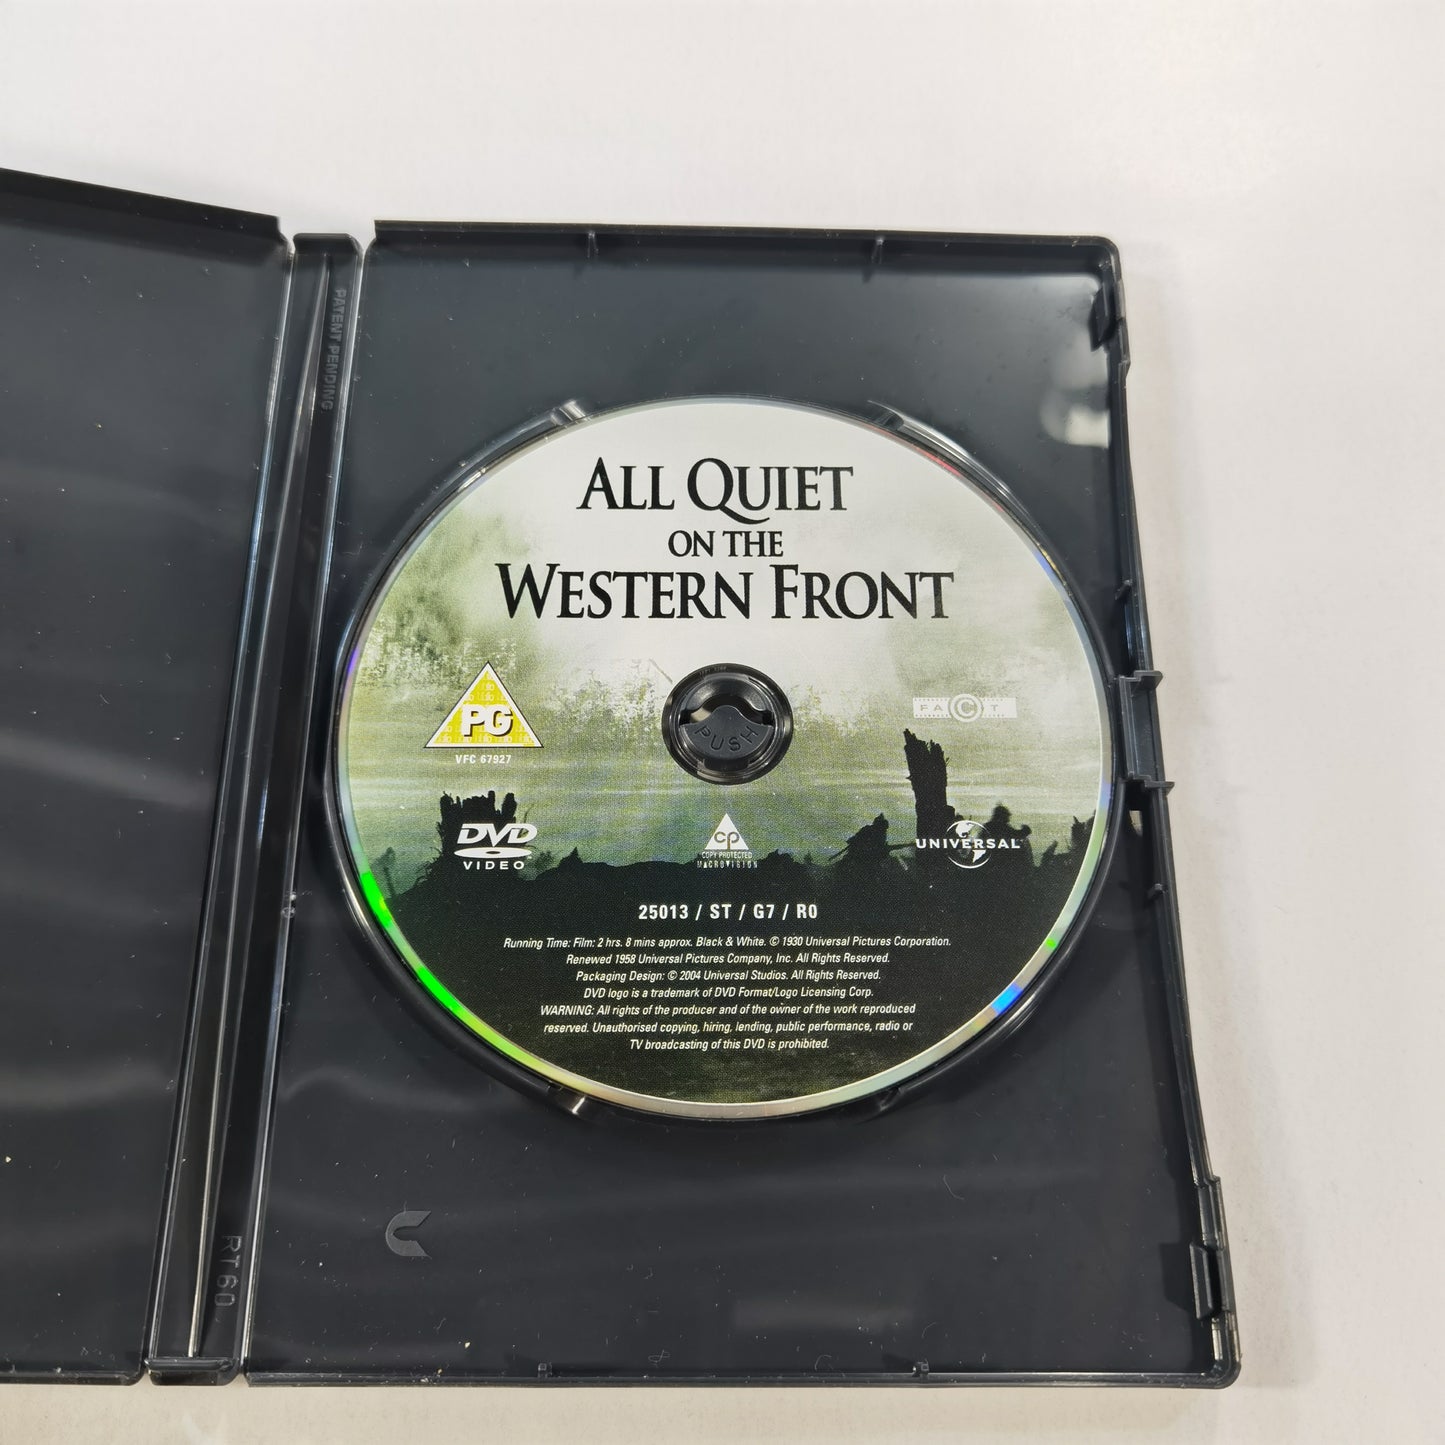 All Quiet on the Western Front (1930) - DVD UK 2005